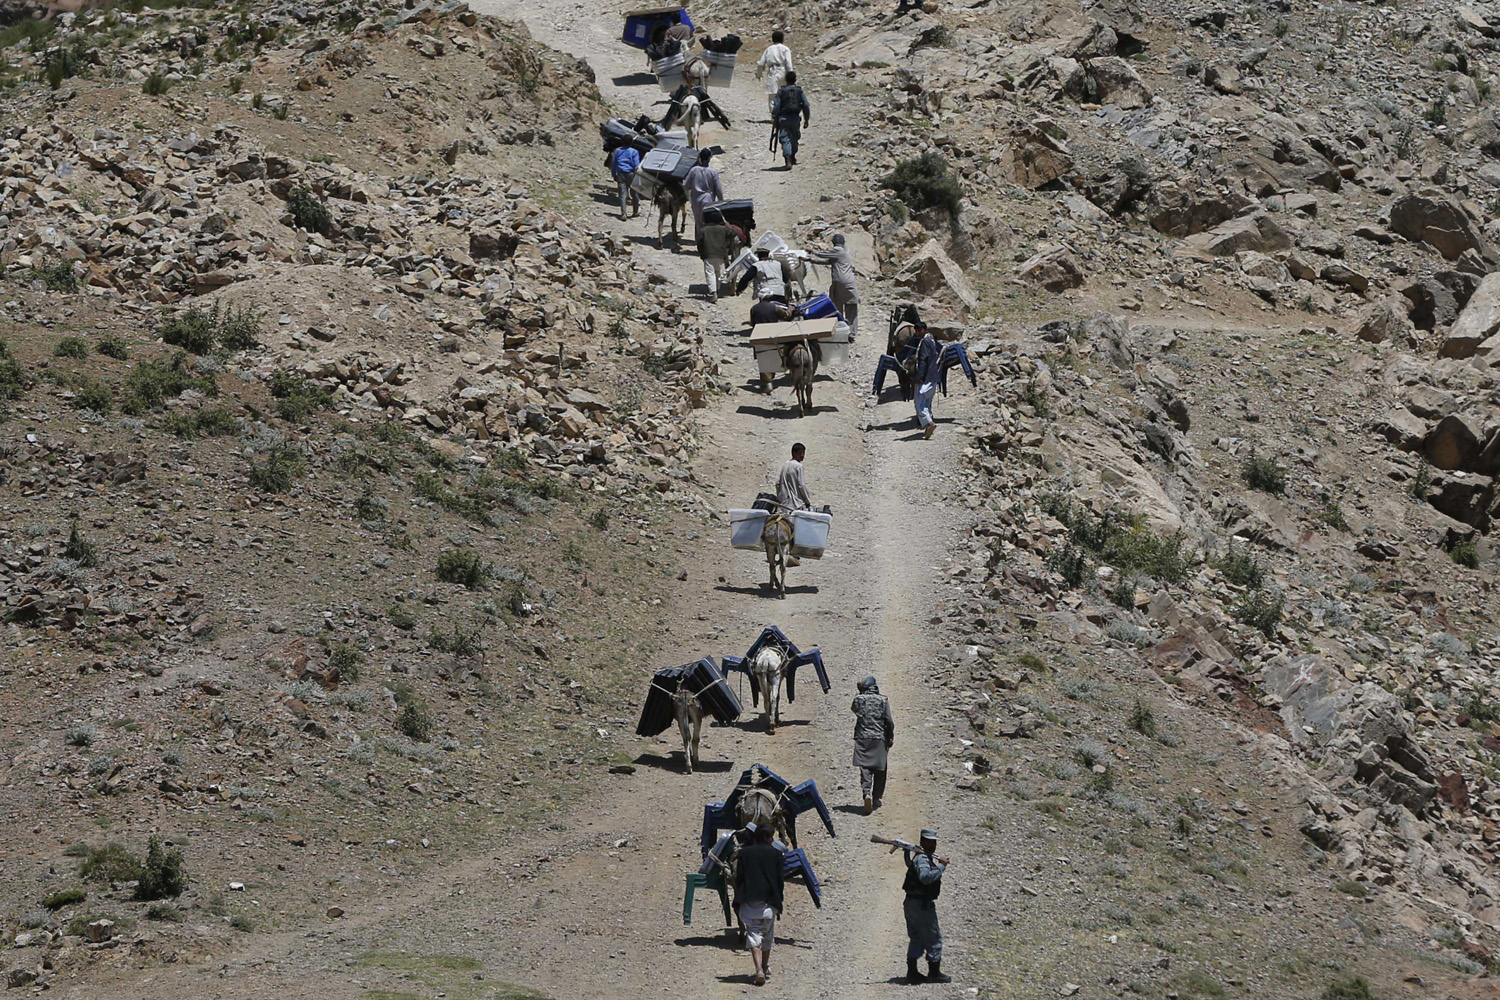 Afghan men lead donkeys loaded with ballot boxes and other election material to be transported to polling stations which are not accessible by road in Shutul, Panjshir